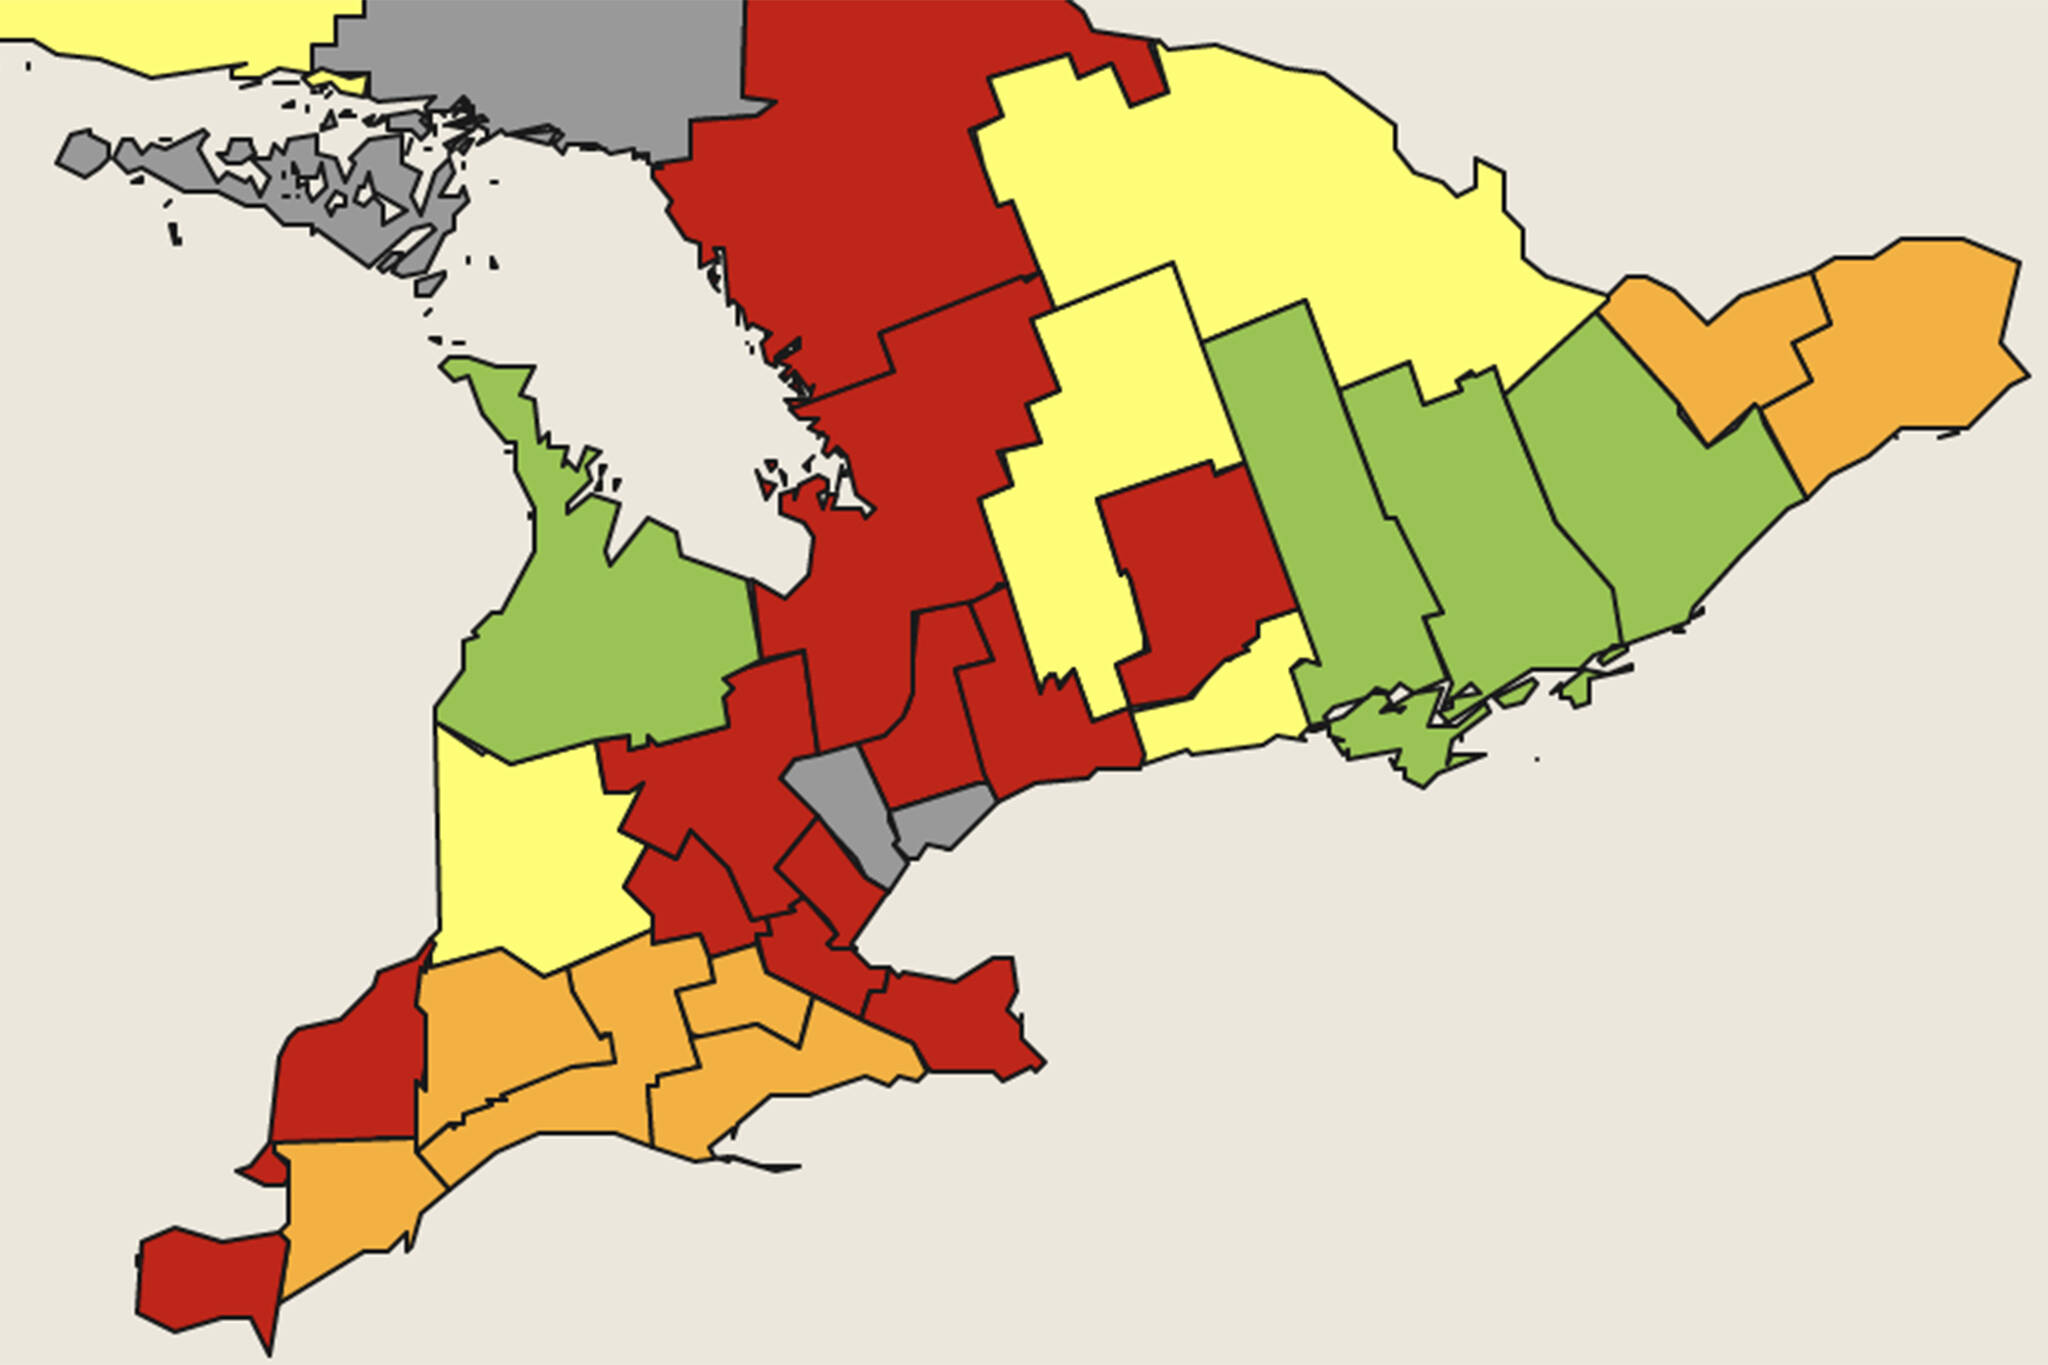 This interactive map of Ontario makes it easy to see which lockdown